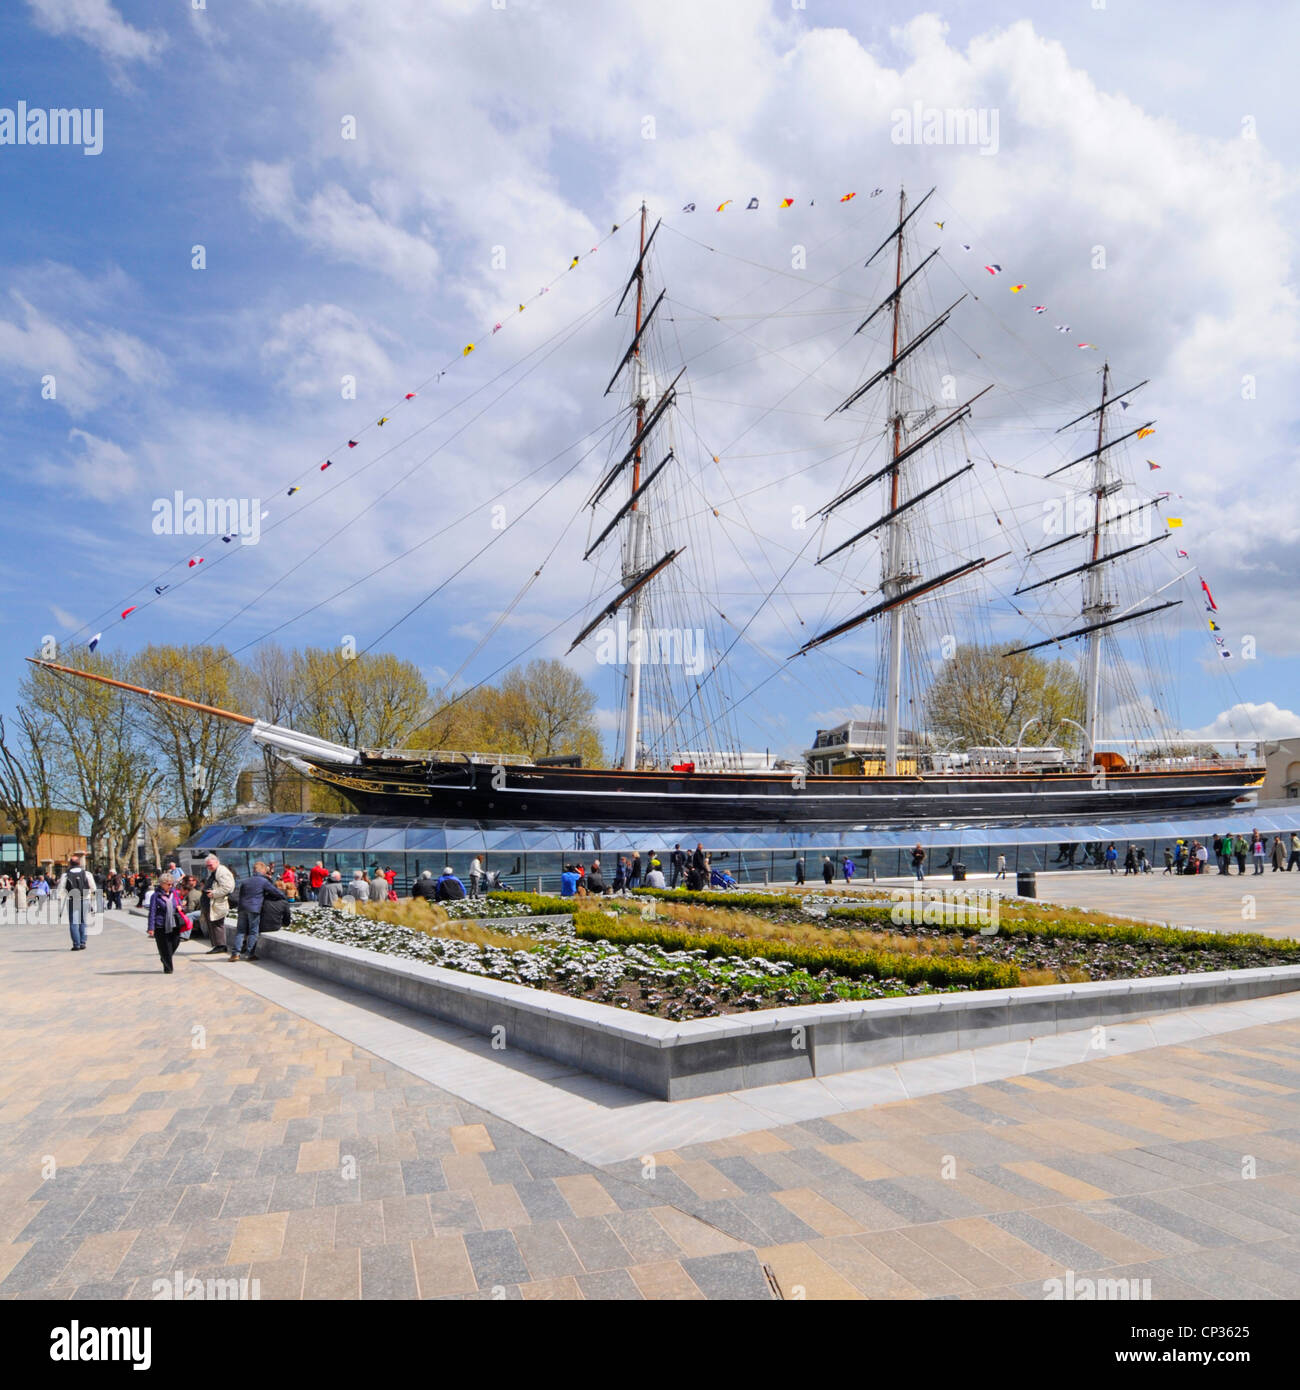 People in paved open space at historical Cutty Sark tea clipper museum ship & open to onboard visitors after restoration Greenwich London England UK Stock Photo